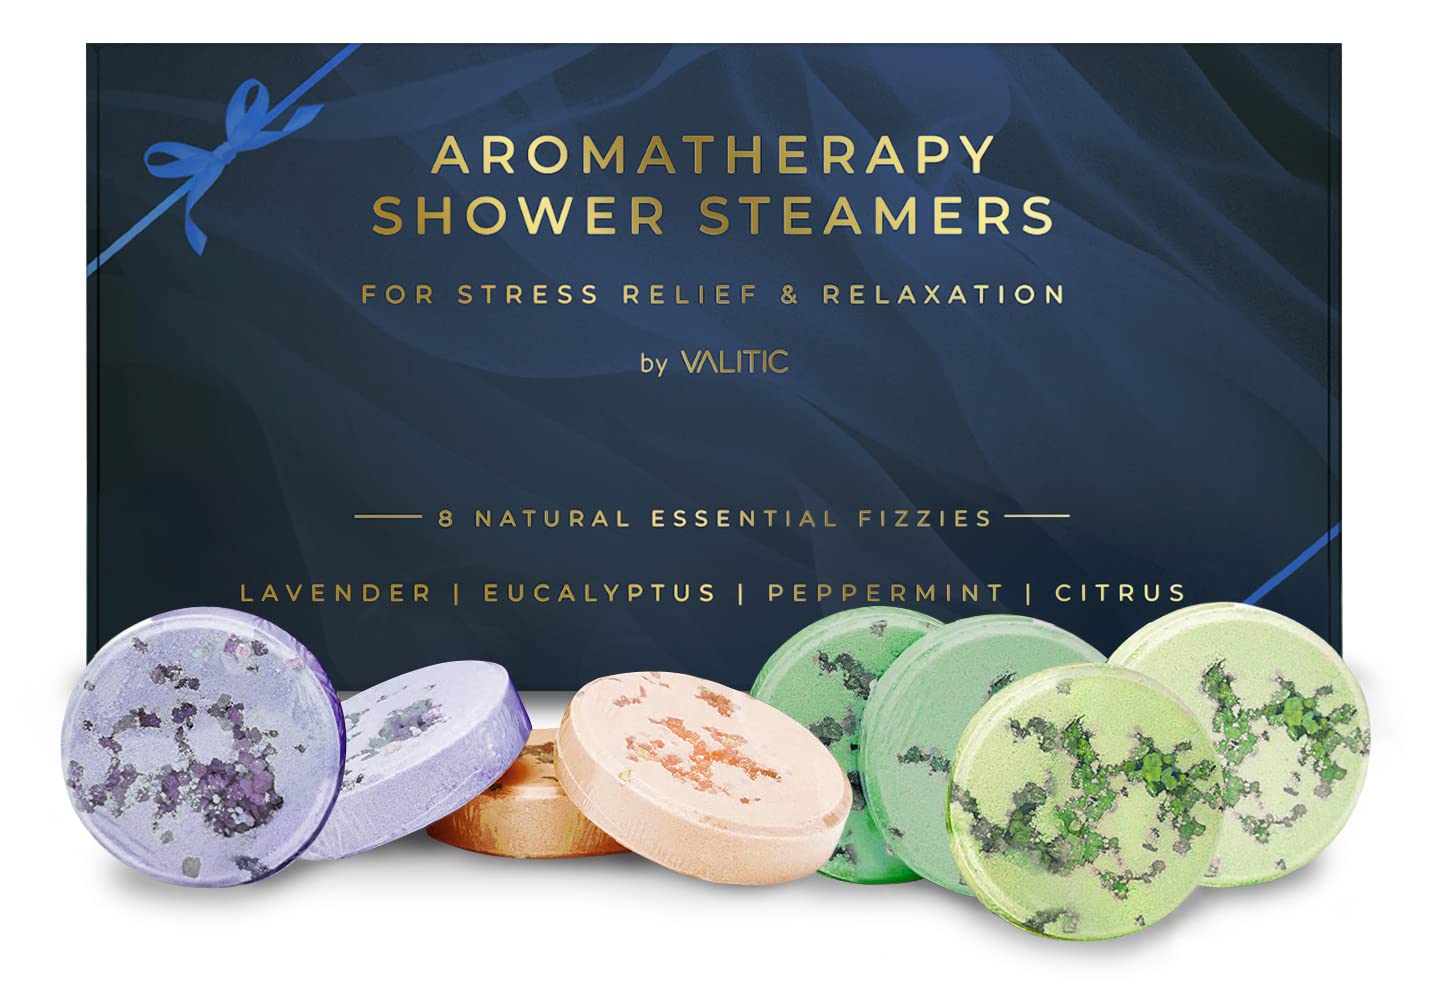 Valitic Aromatherapy Shower Steamers for Stress Relief and Relaxation -  Gifts for Women Mom Birthday 8 Natural Essential Fizzies Shower Bombs - 4  Scents - Lavender, Eucalyptus, Citrus, and Peppermint Lavander, Eucalyptus,  …